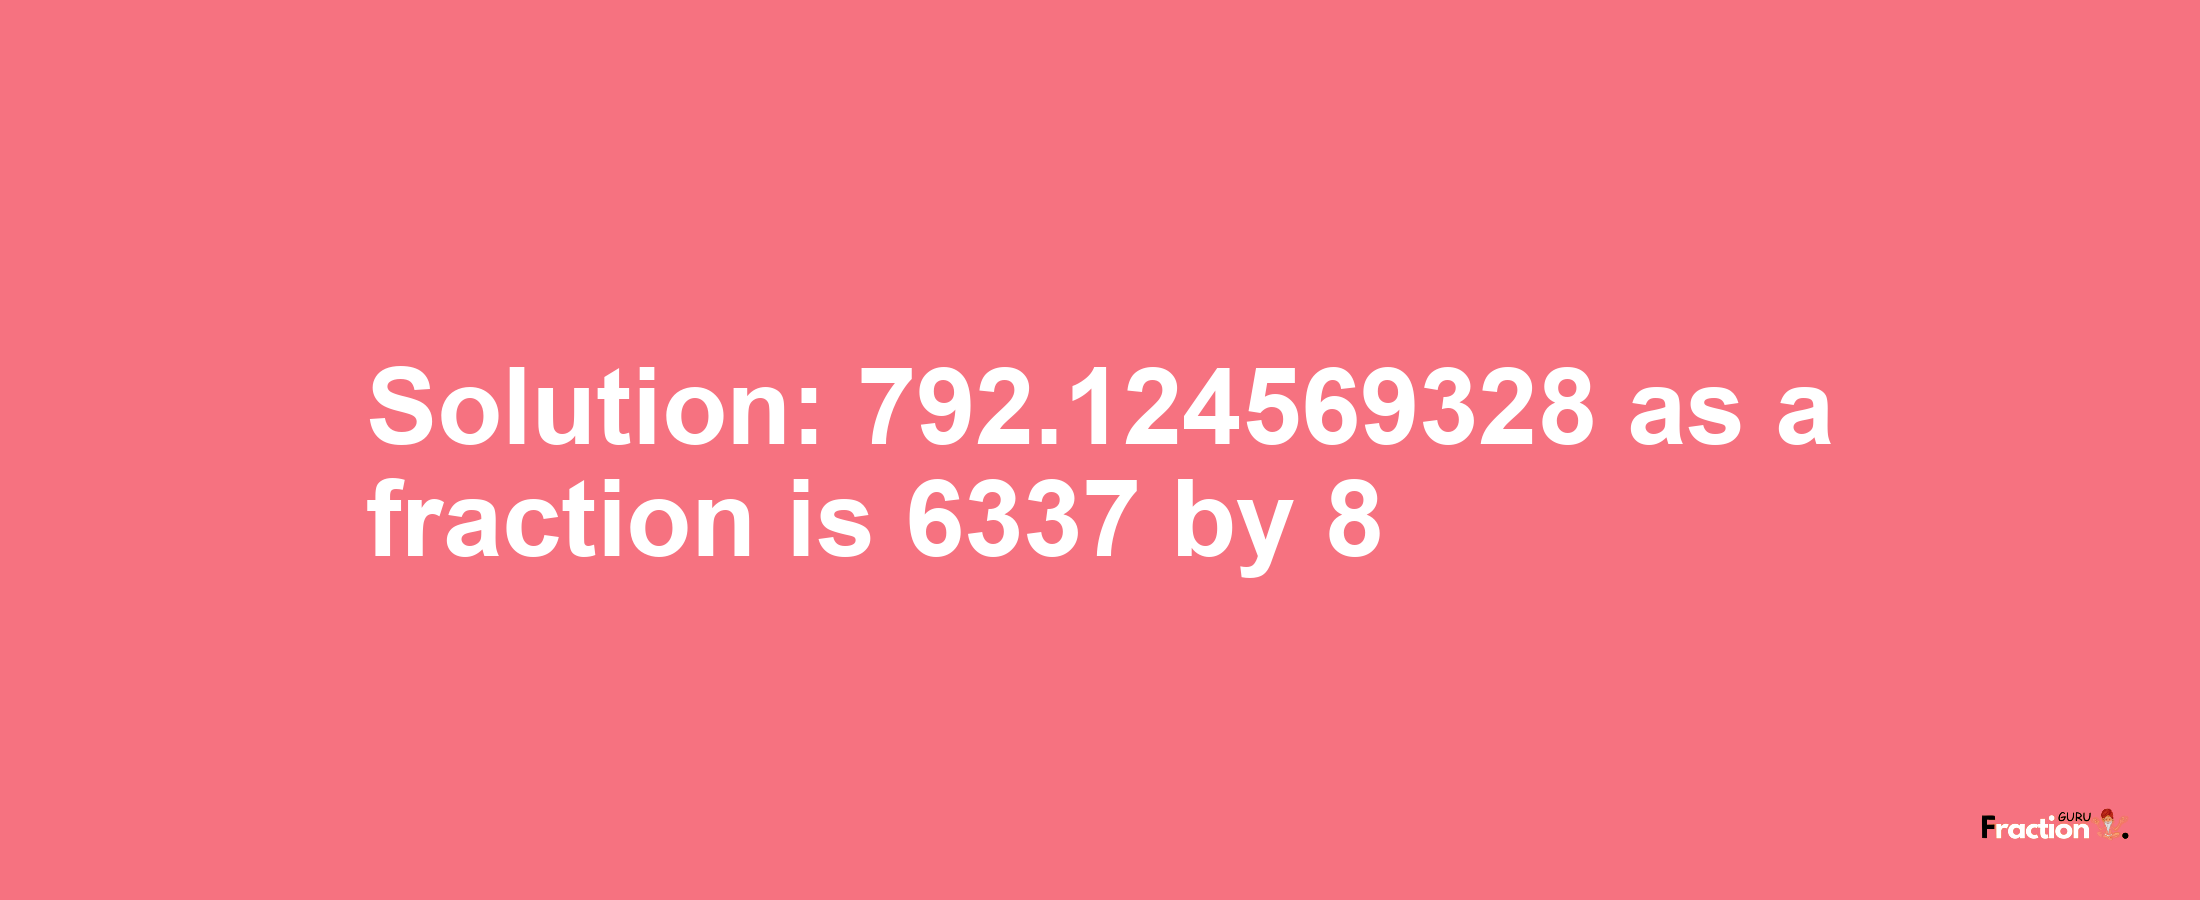 Solution:792.124569328 as a fraction is 6337/8